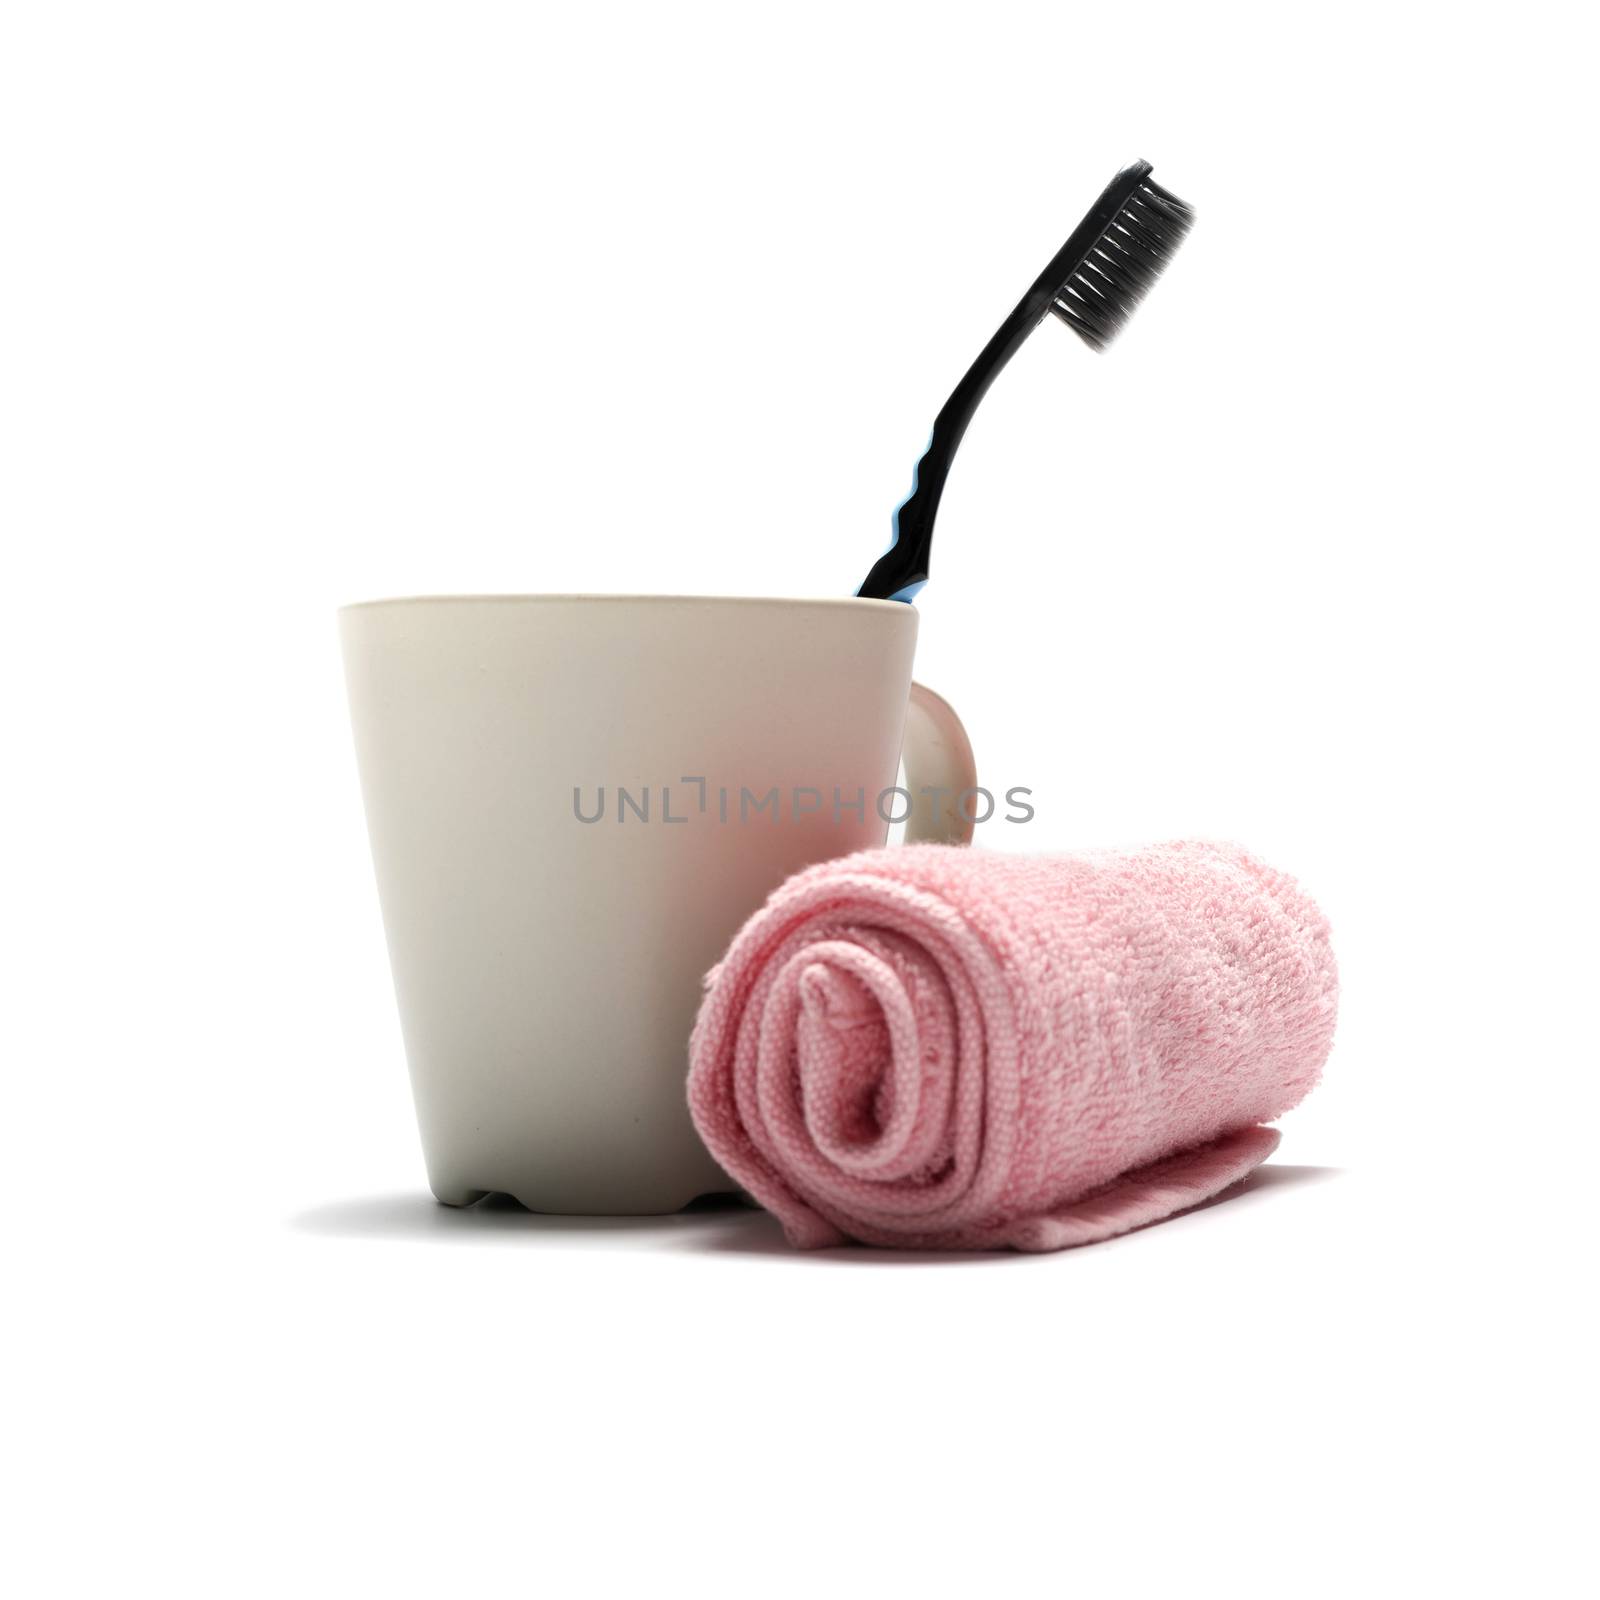 tooth brush and towel with mug isolated on white background